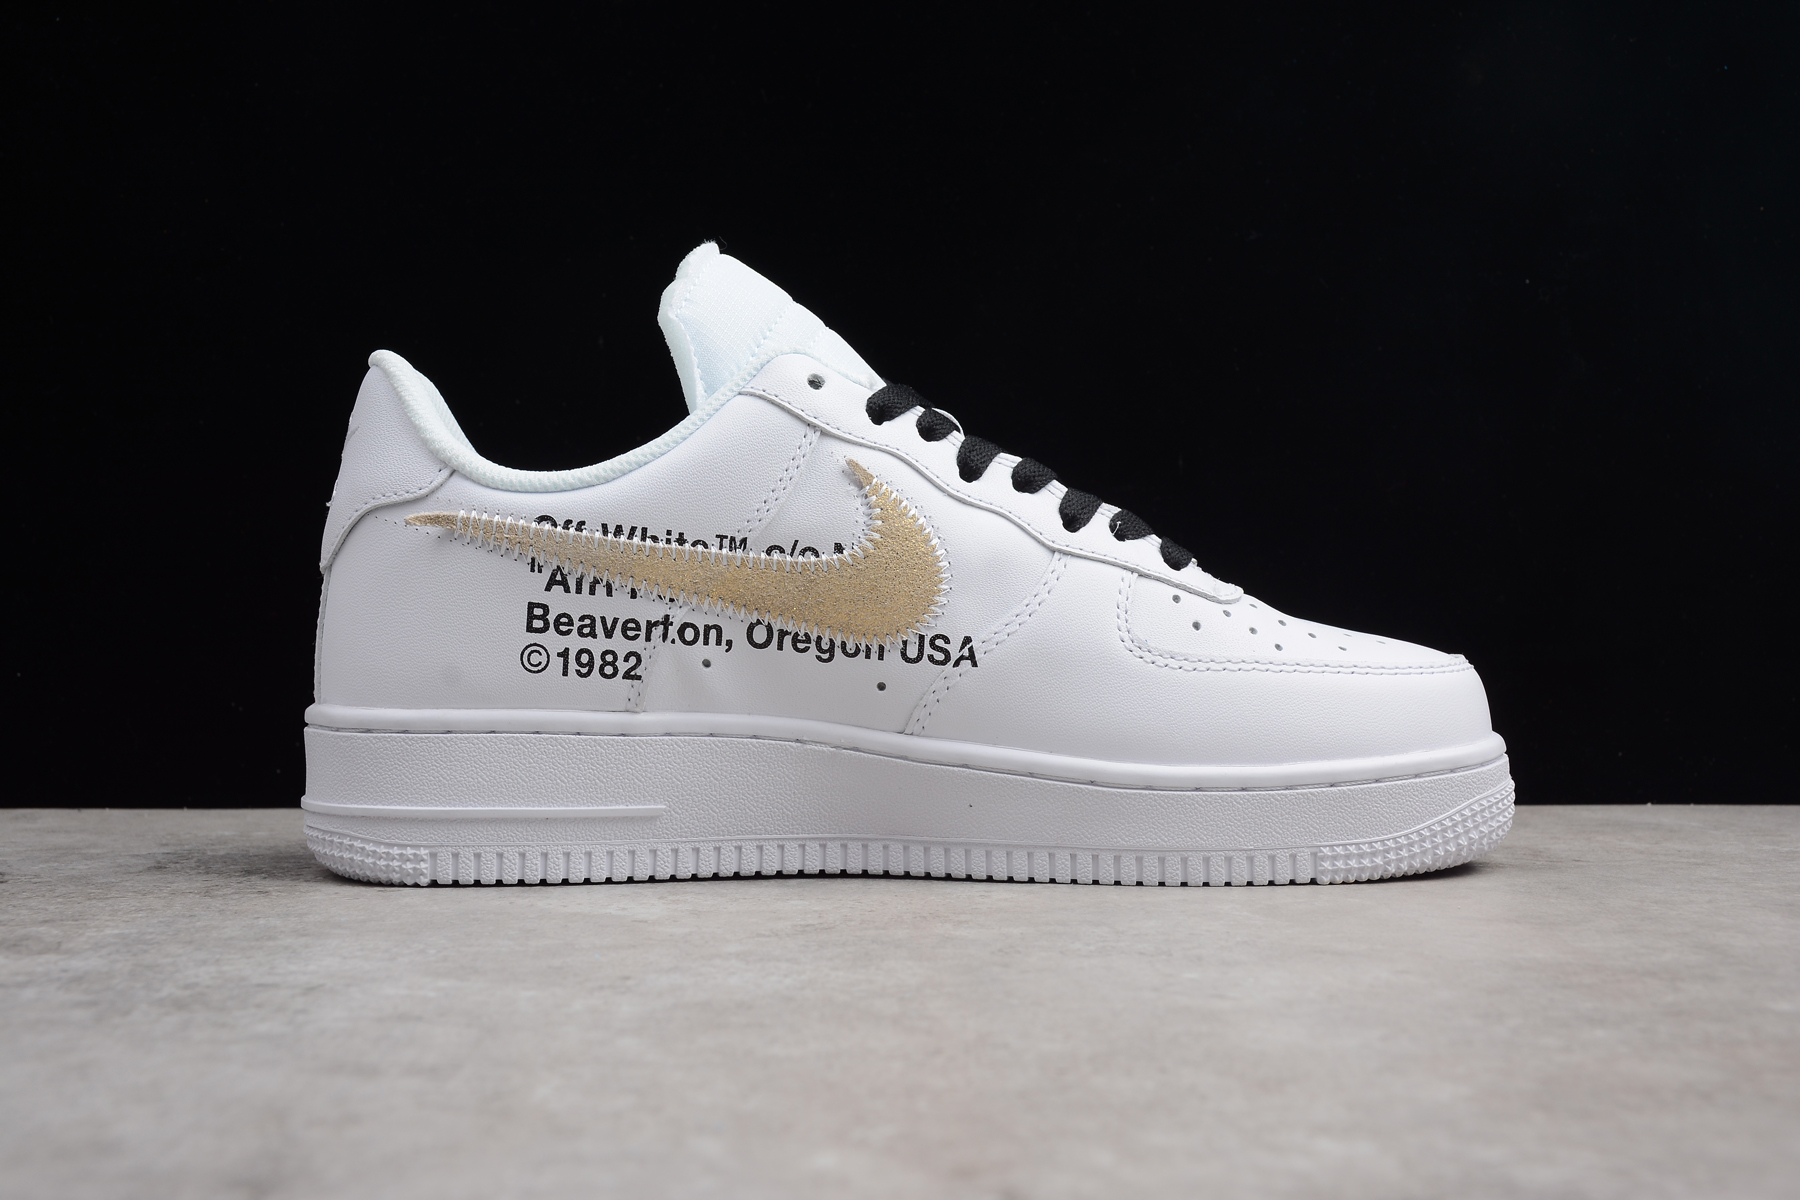 2018 OFF-WHITE x Nike Air Force 1 Low White Black Gold AA8152-700